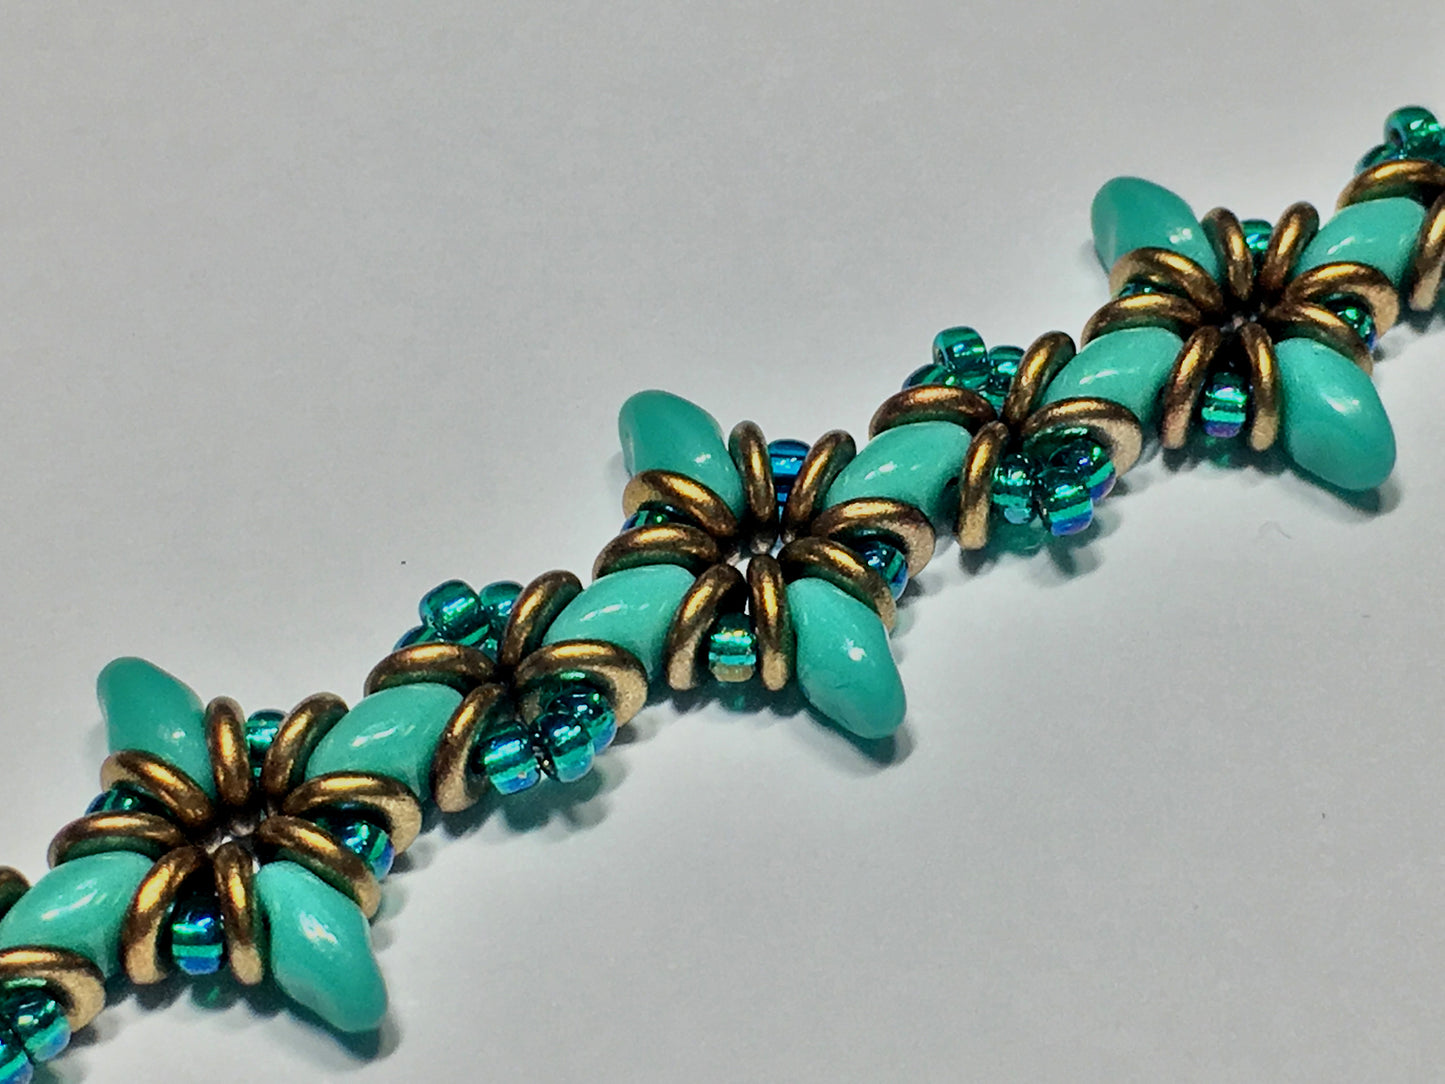 Bead Kit to Make "Oh, My Stars! Bracelet" Turquoise Green / Emerald / Bronze with Free Tutorial starting at $9.99